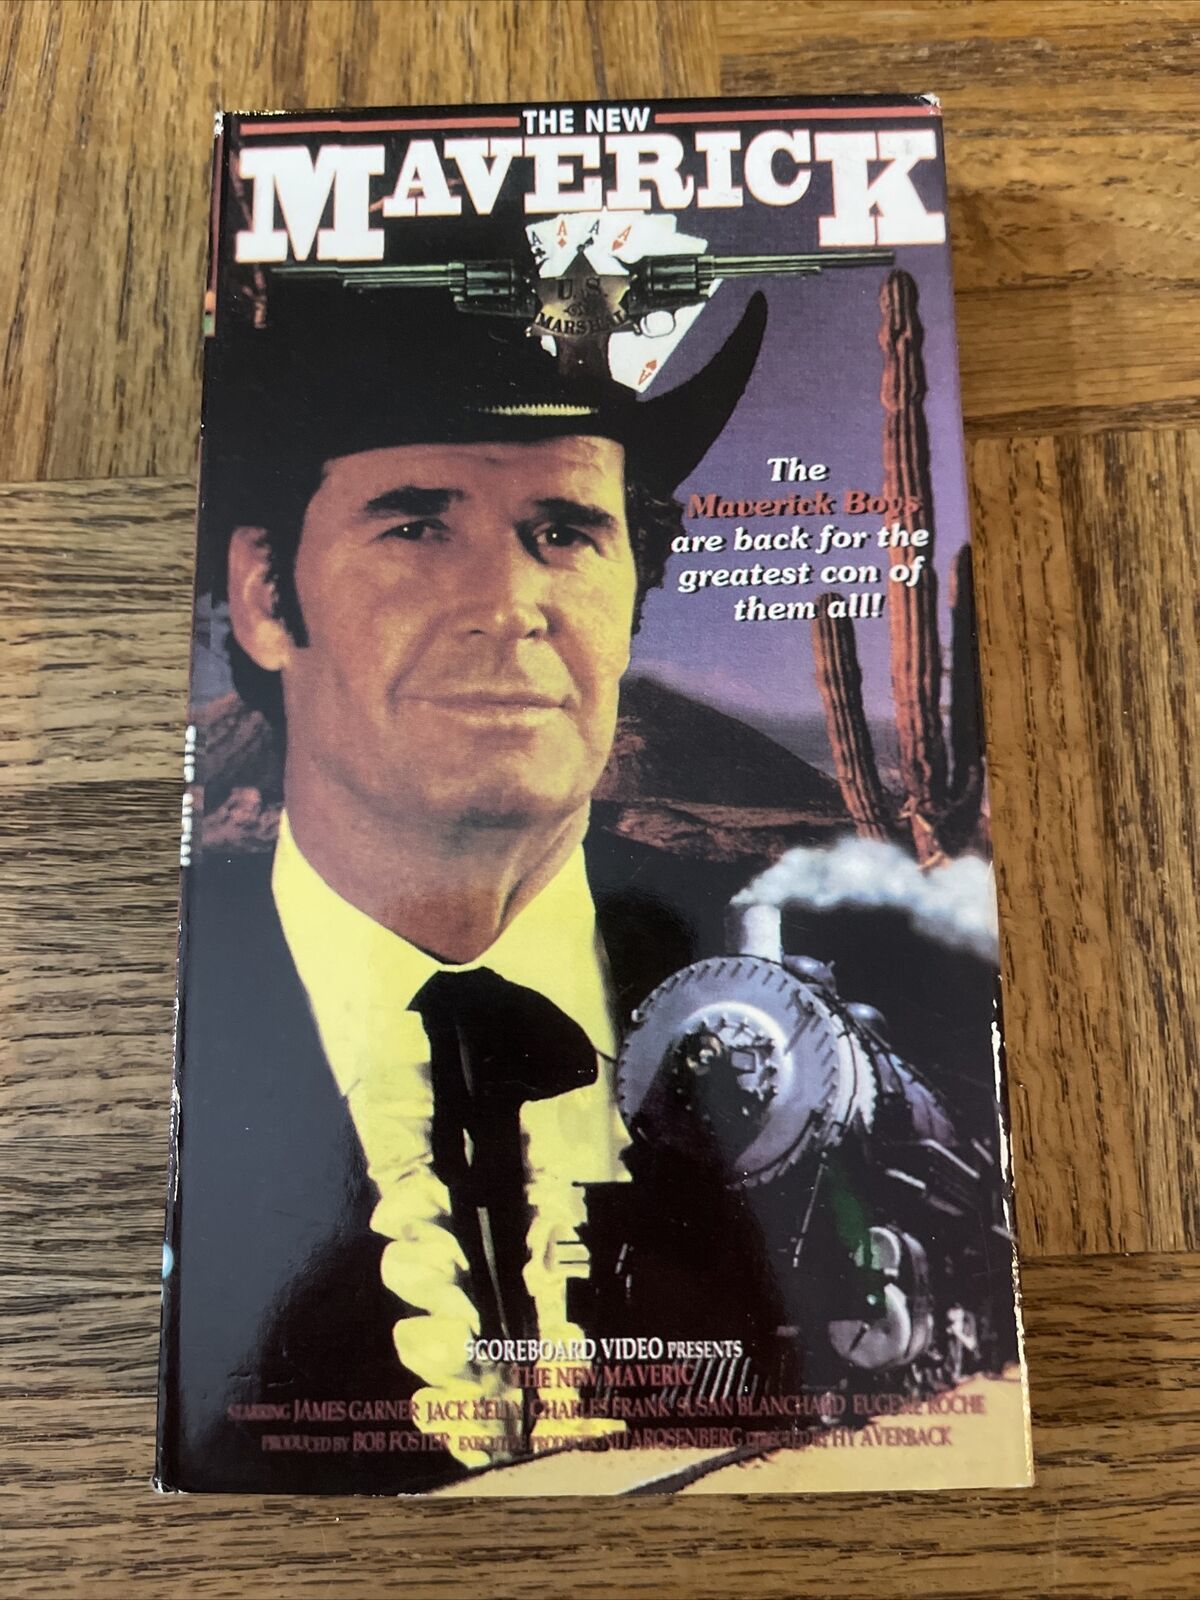 Primary image for The New Maverick VHS